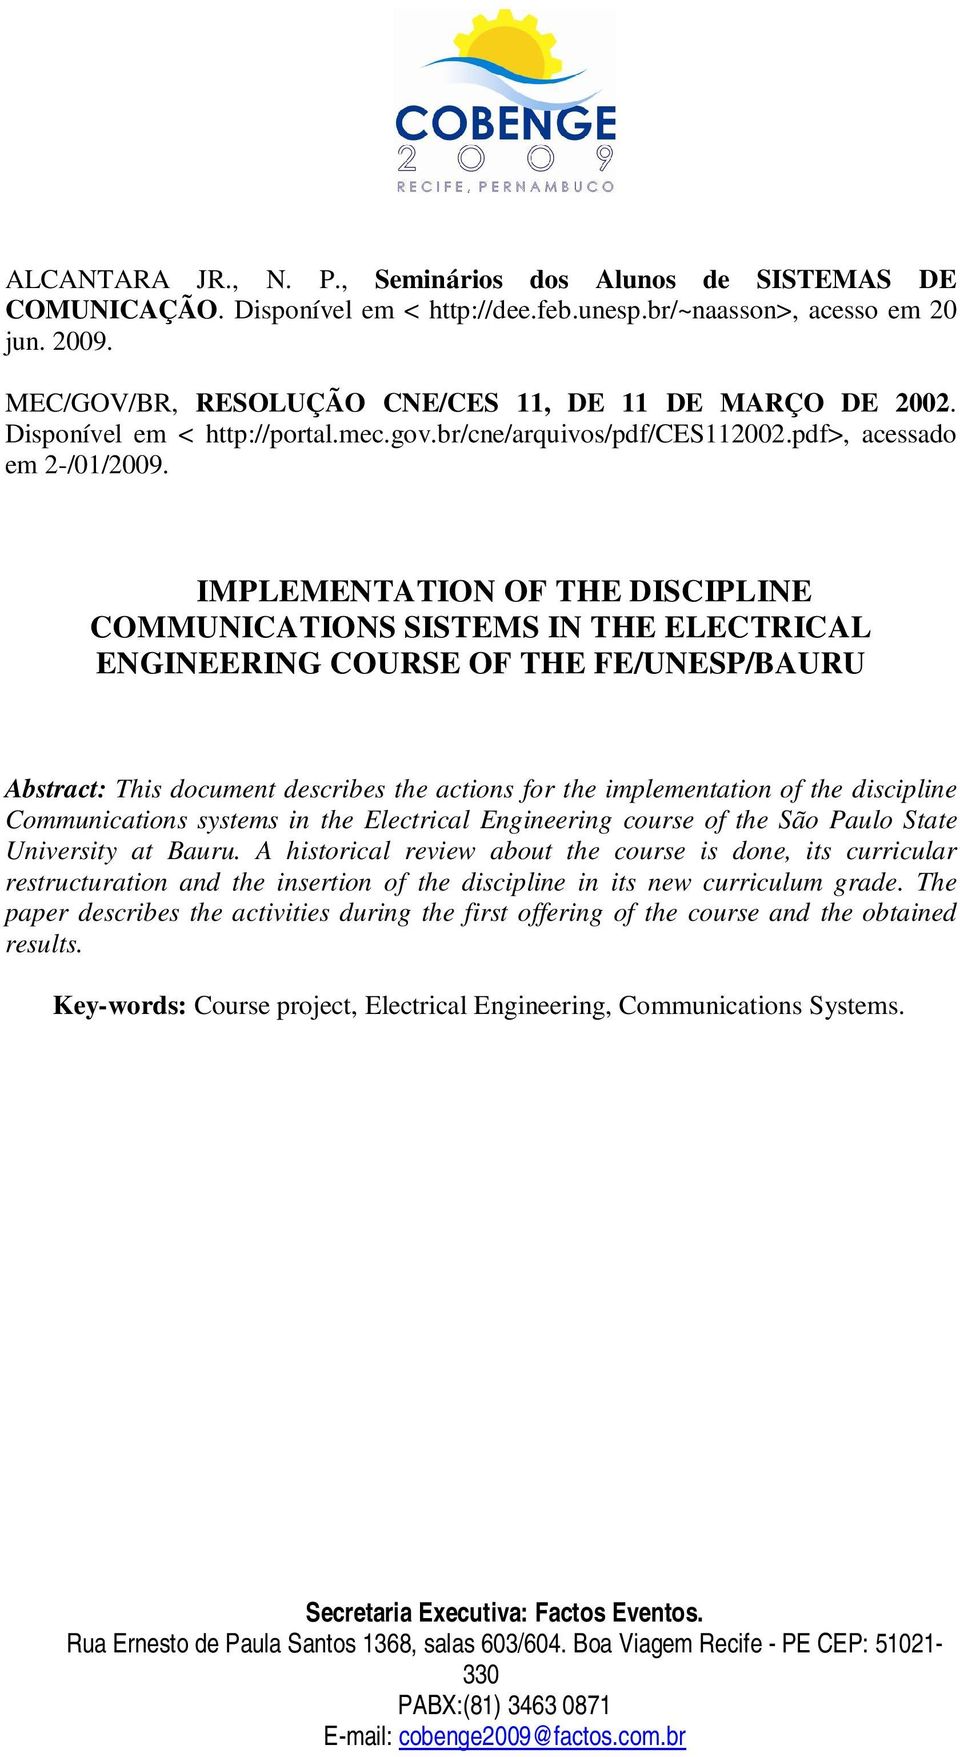 IMPLEMENTATION OF THE DISCIPLINE COMMUNICATIONS SISTEMS IN THE ELECTRICAL ENGINEERING COURSE OF THE FE/UNESP/BAURU Abstract: This document describes the actions for the implementation of the